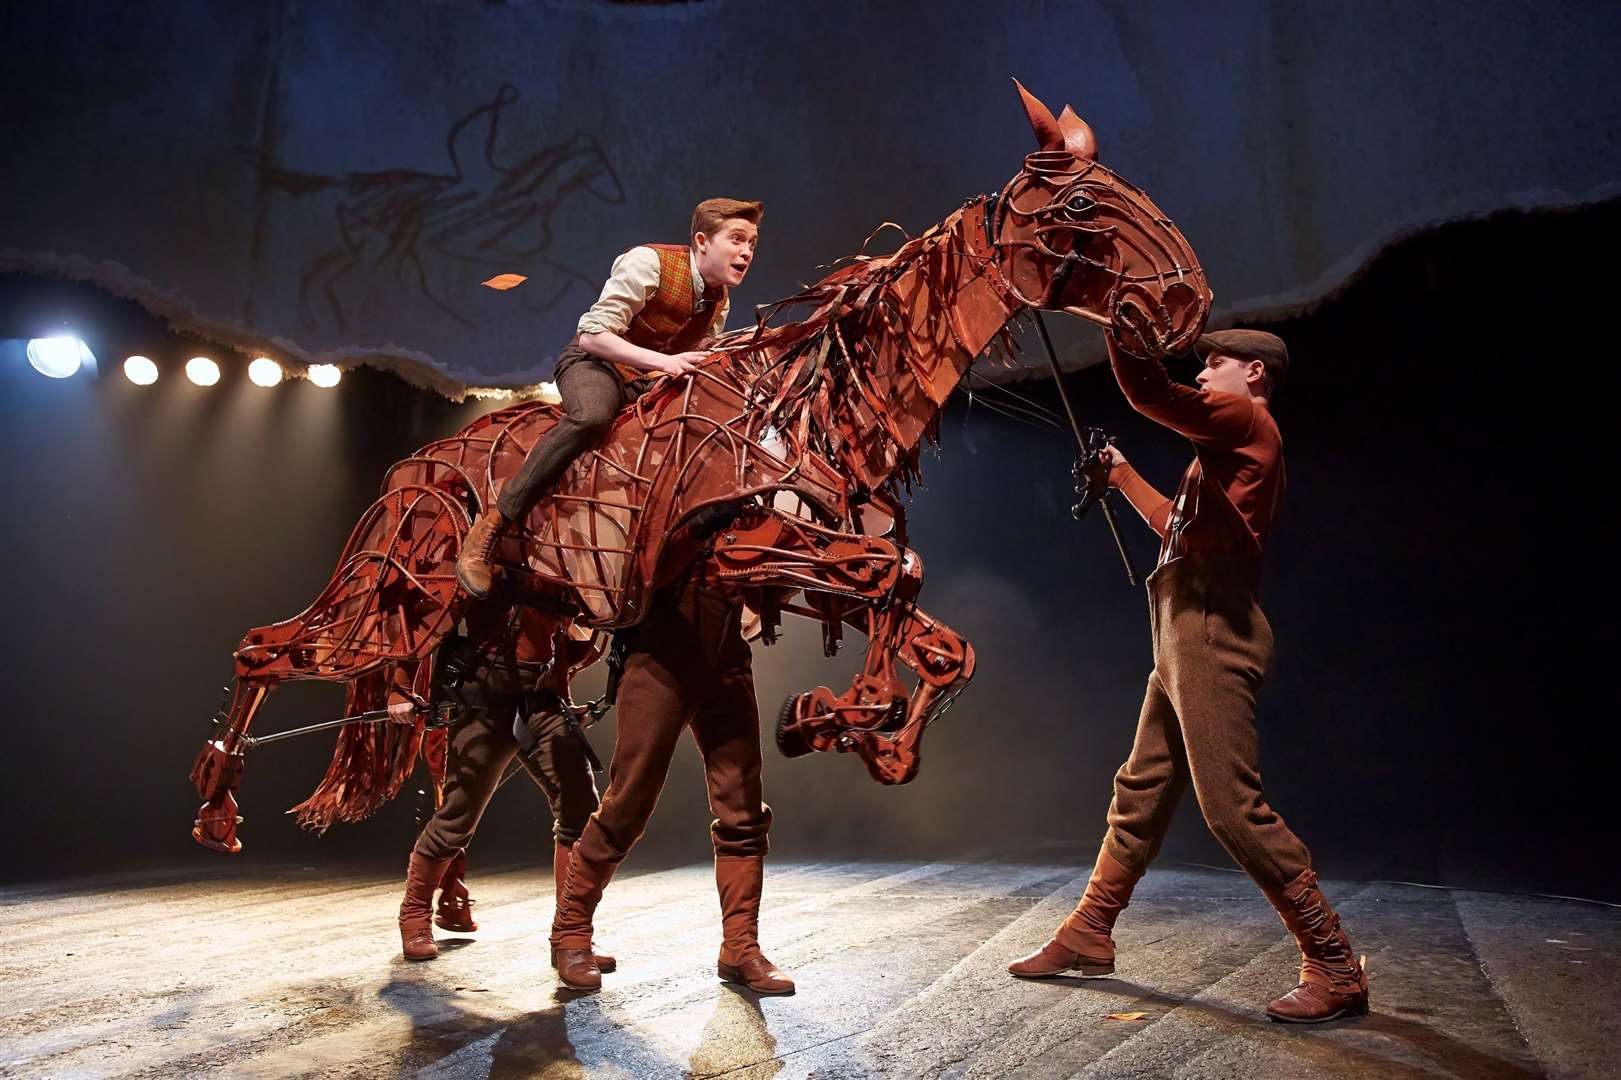 Joey the War Horse appeared at the first festival